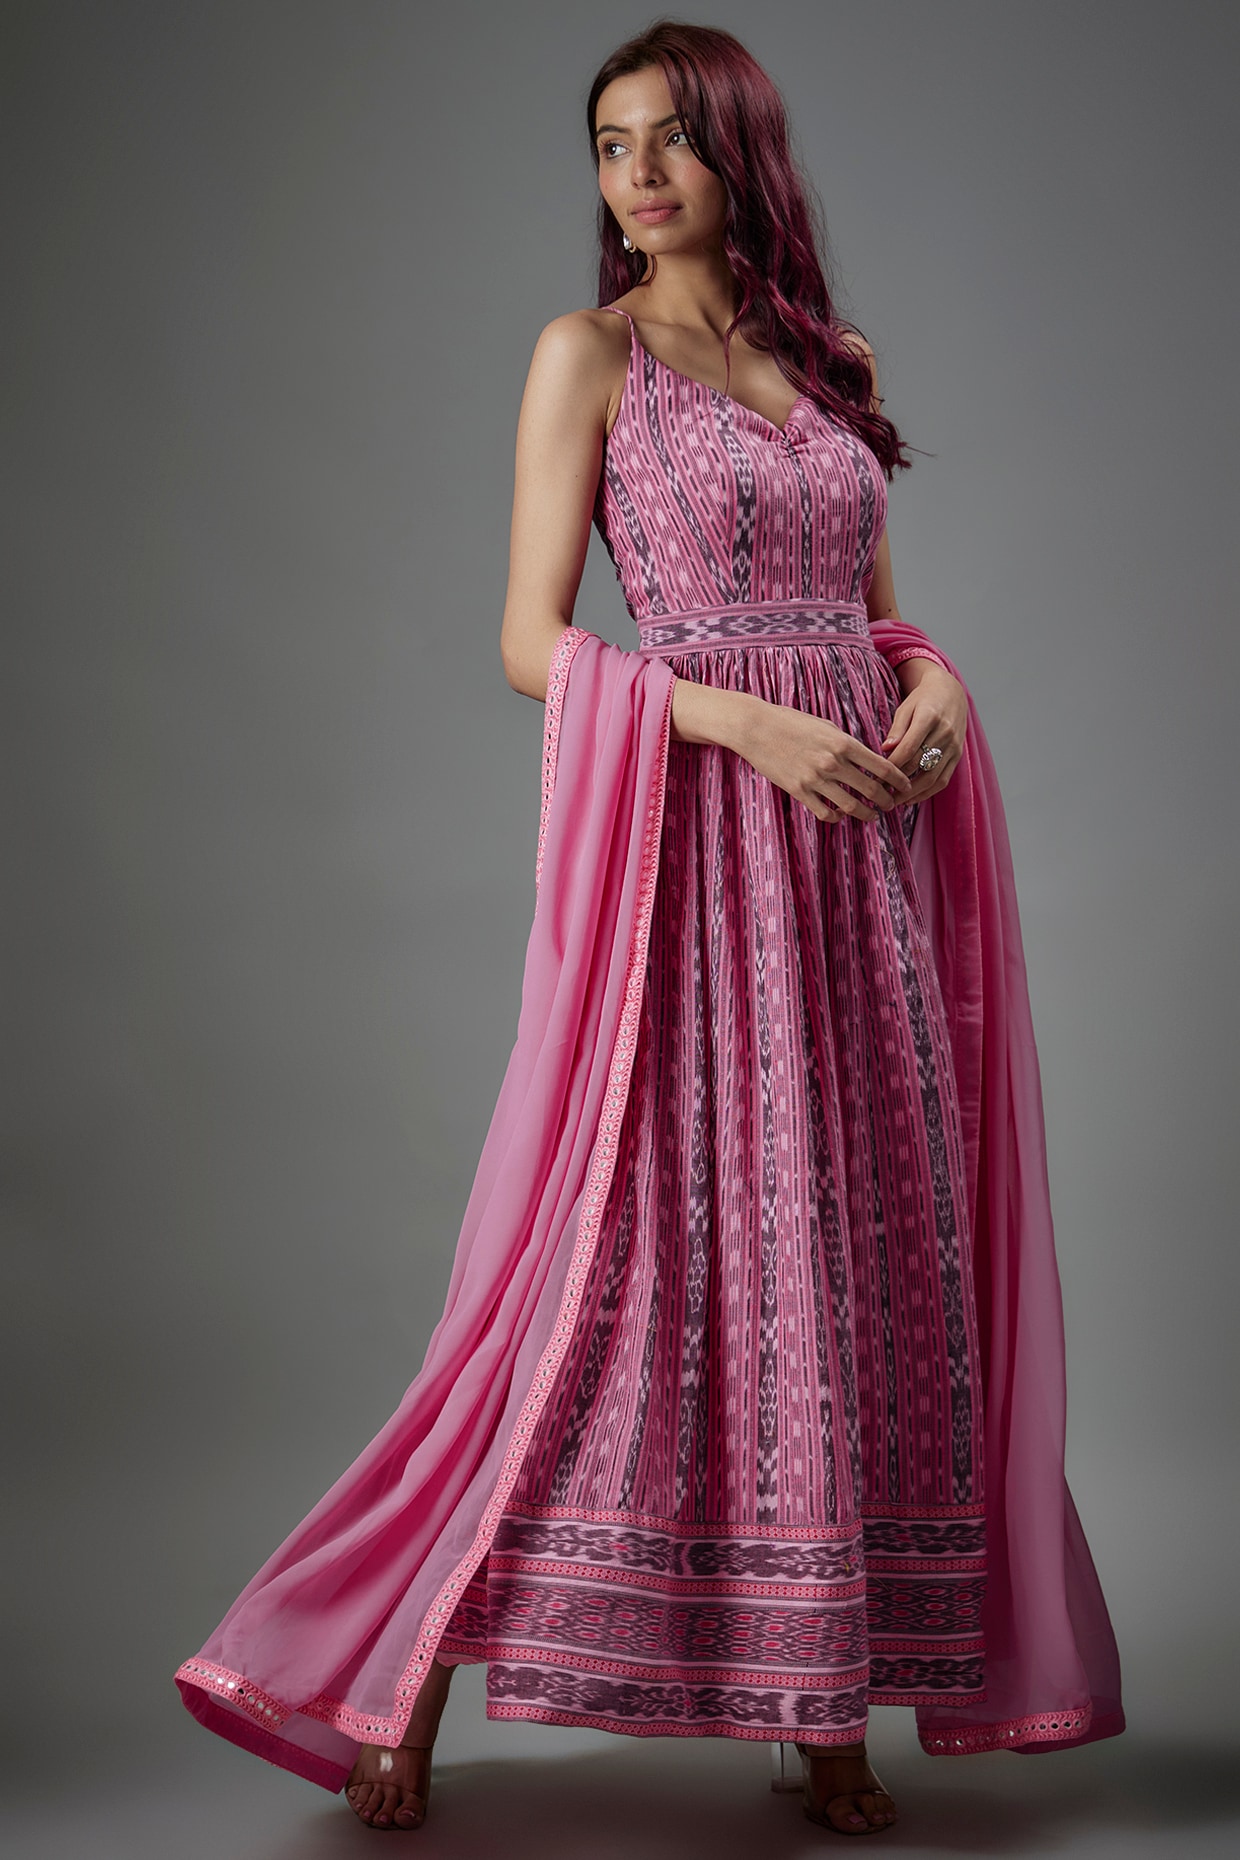 Buy Umbrella Dresses online at Best Prices in India - Aachho